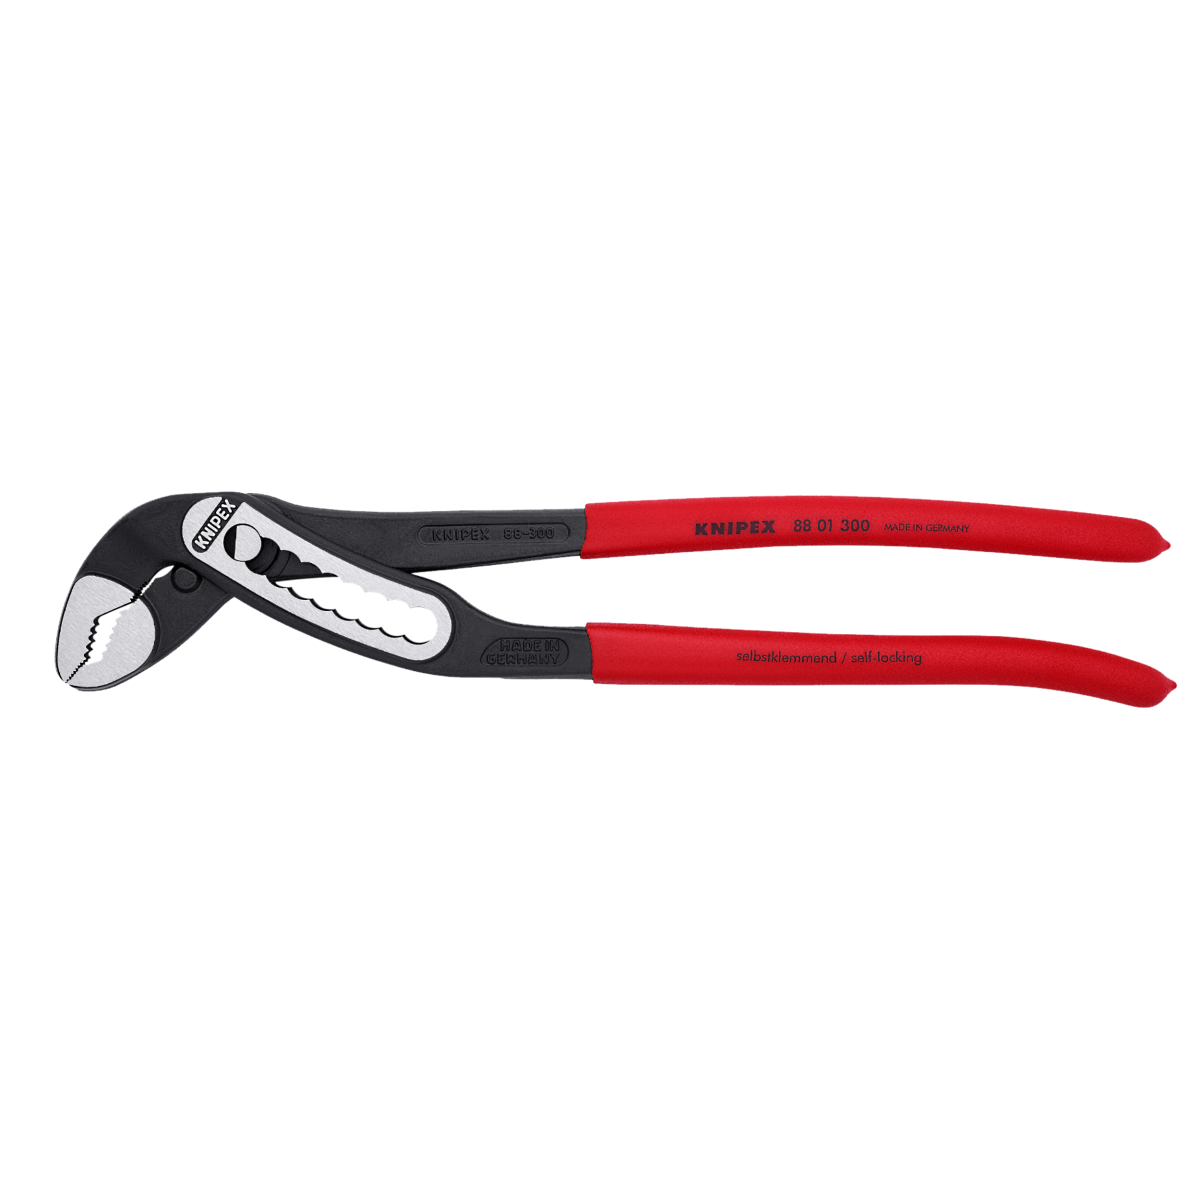 Knipex 12" Water Pump Pliers with the Alligator Jaws